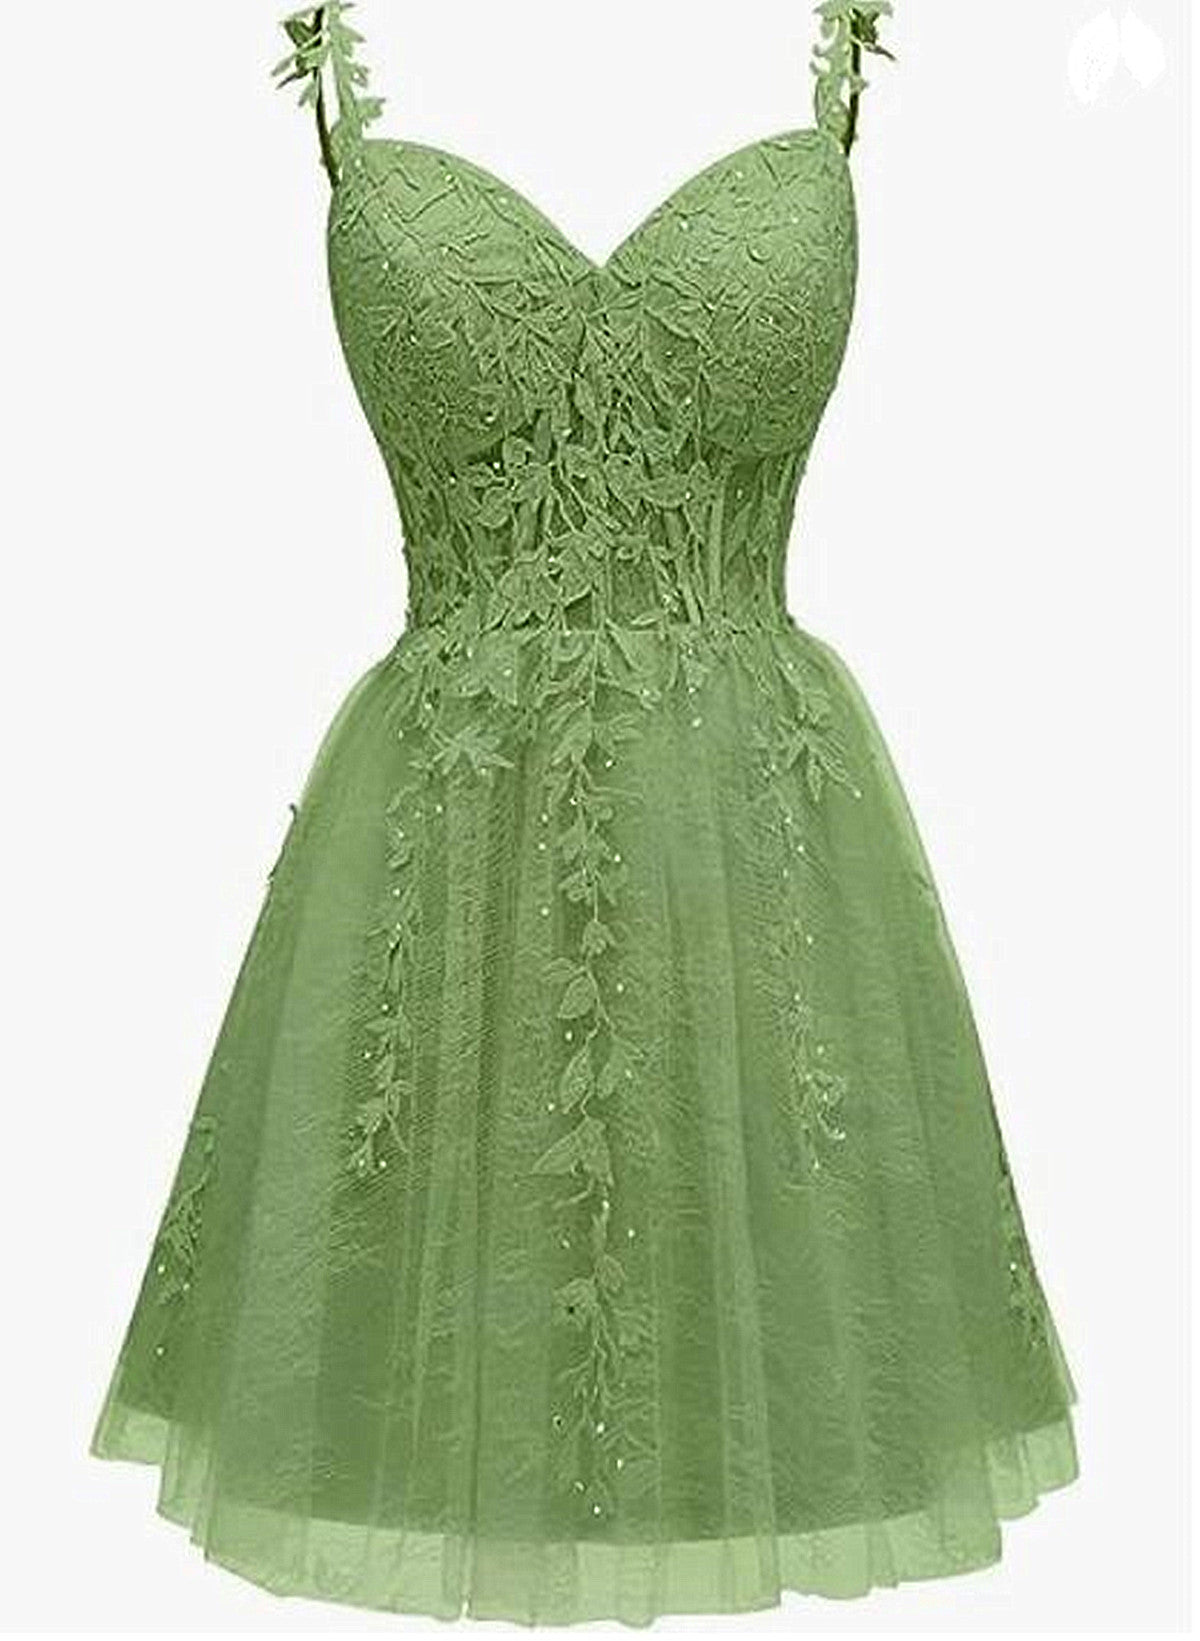 Prom Dresses For Curvy Figures, Lovely Green Sweetheart Beaded Straps Party Dress, Green Tulle Homecoming Dress